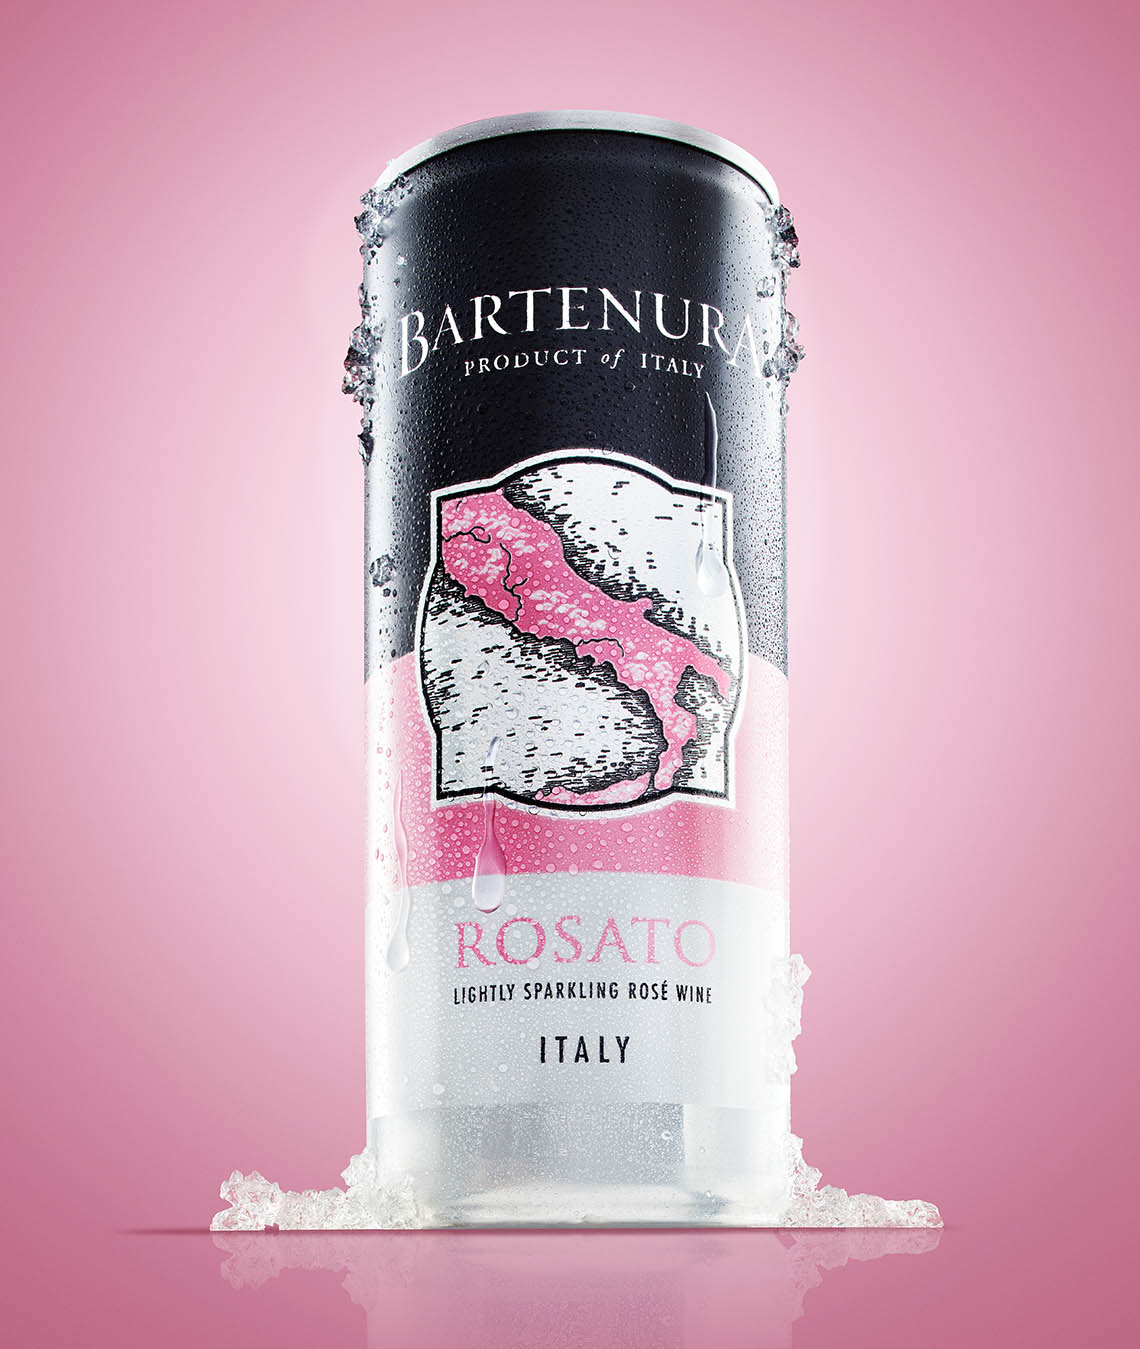 New-york-drink-photography-beverage-photgraphy-rose-in-can